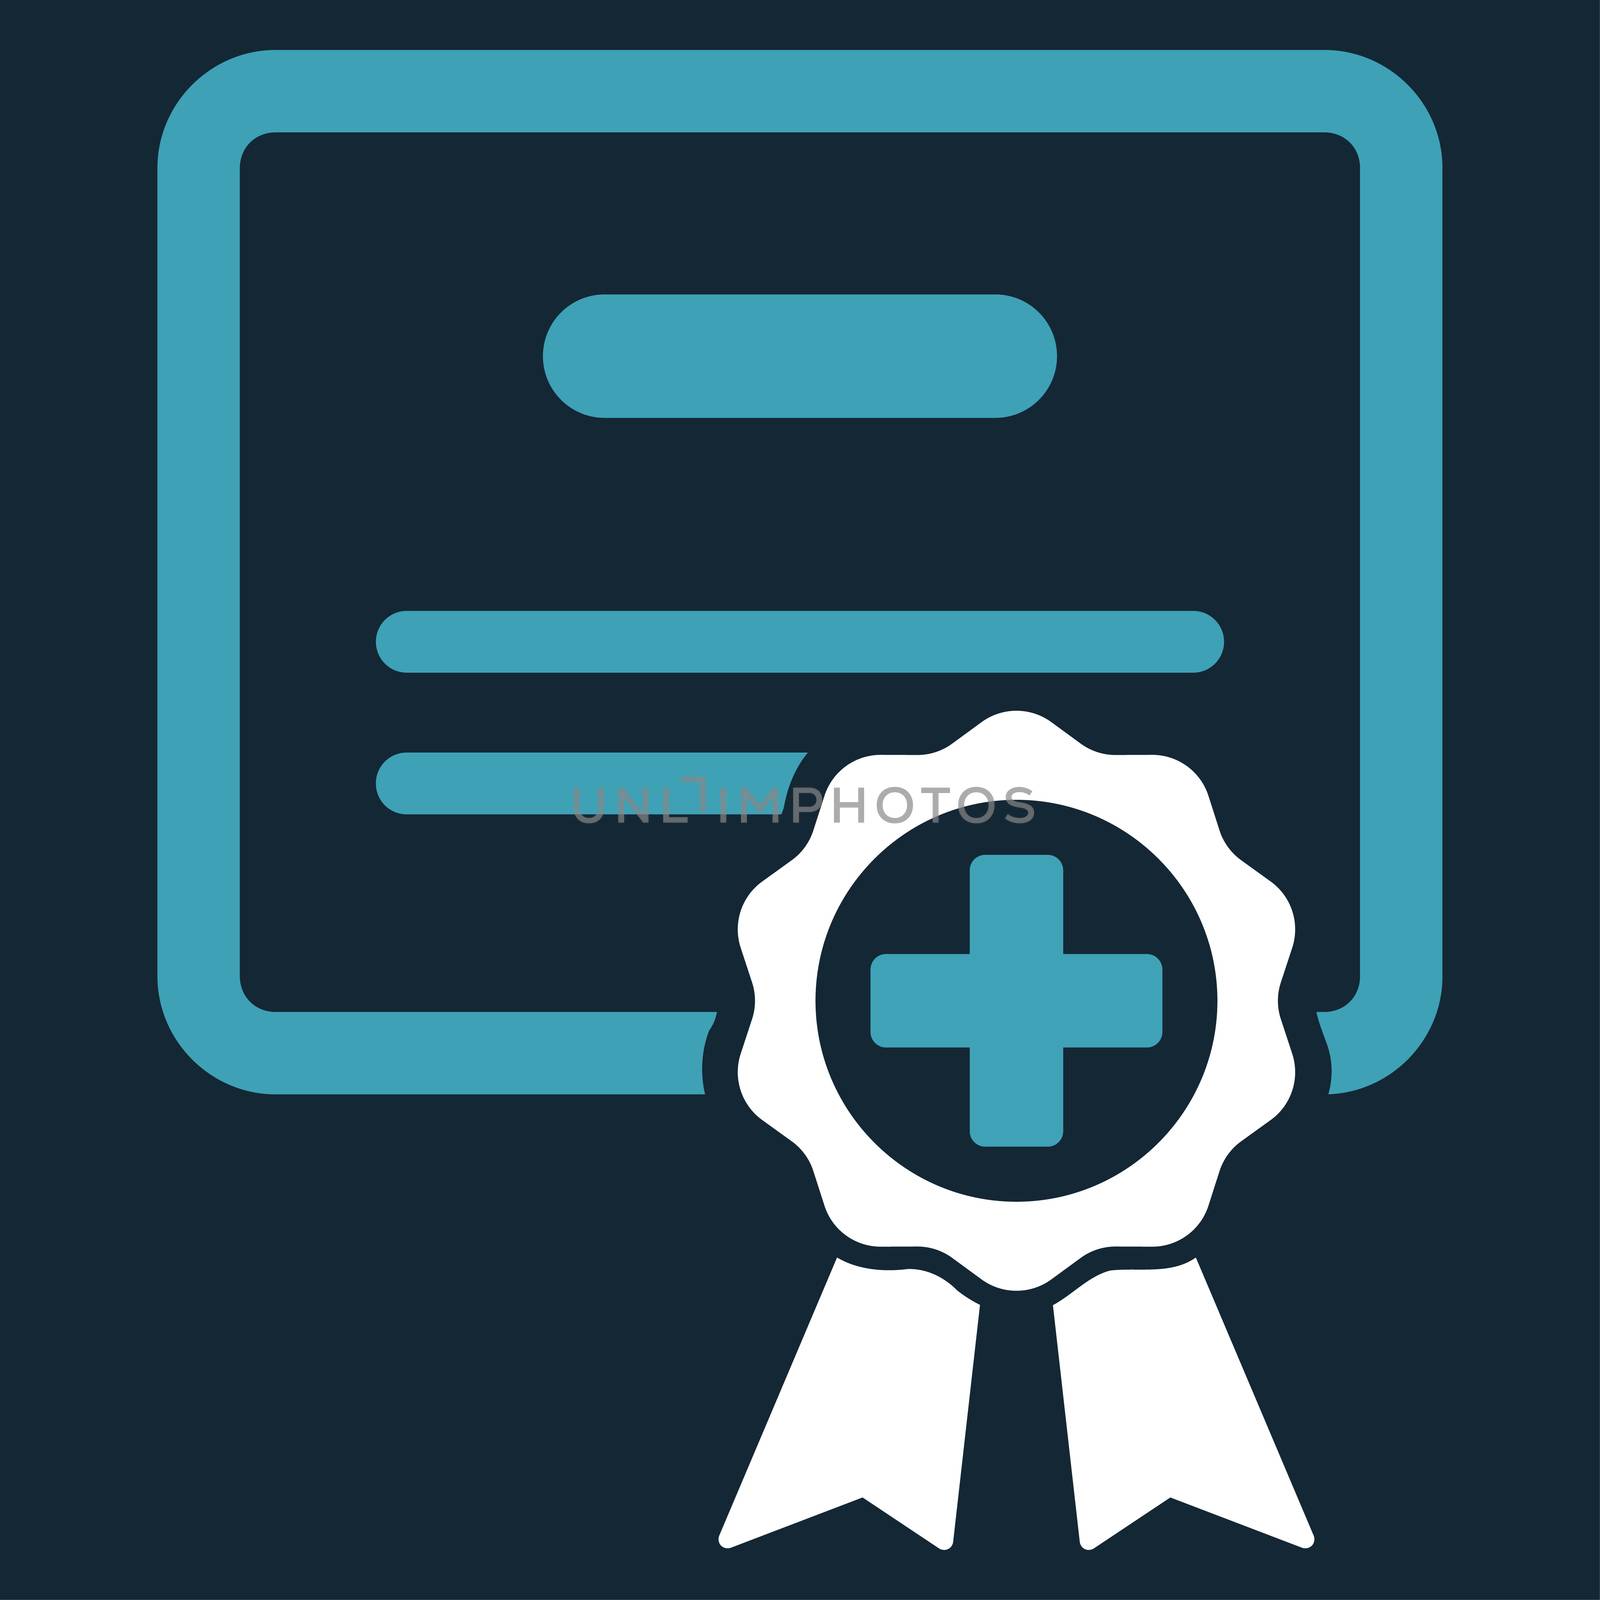 Certification raster icon. Style is bicolor flat symbol, blue and white colors, rounded angles, dark blue background.